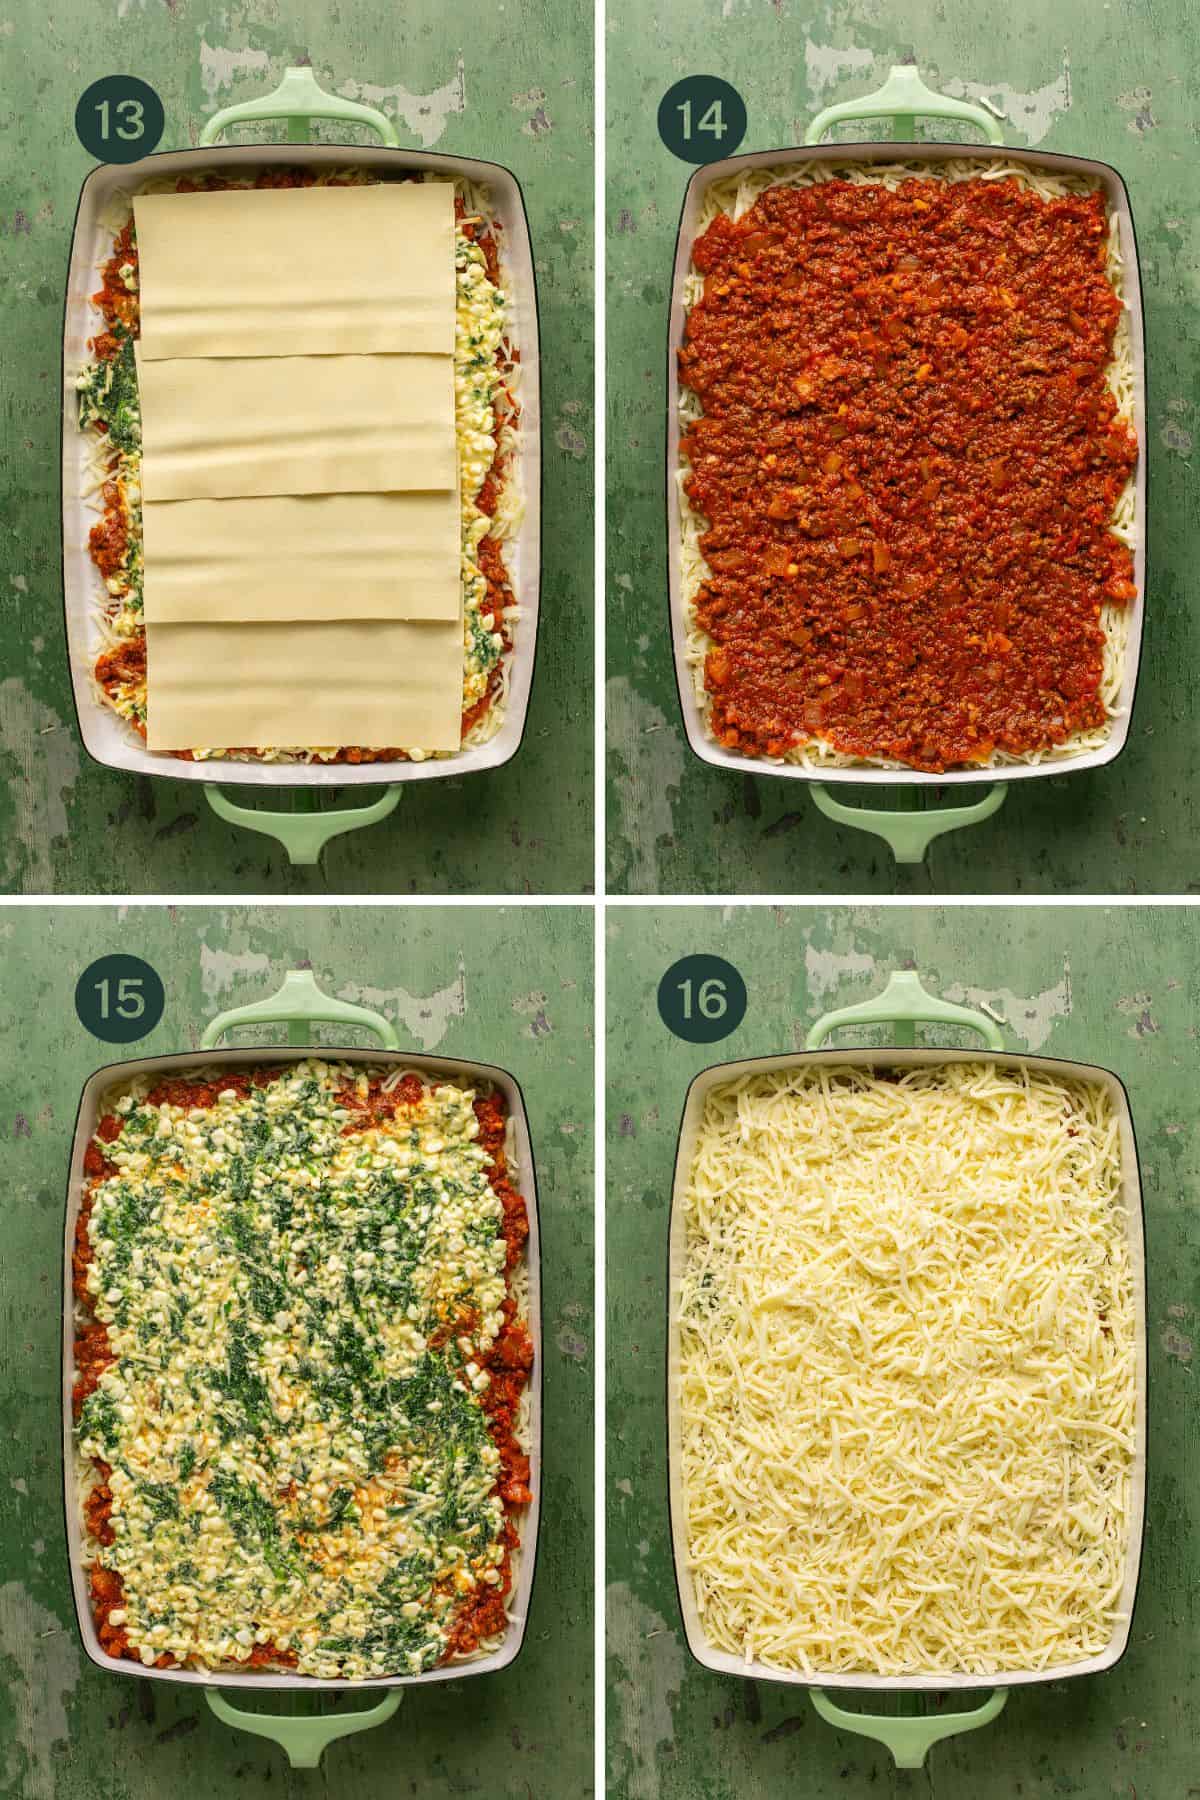 Lasagna steps repeated with noodles, meat sauce, cottage cheese filling and cheese on top. 